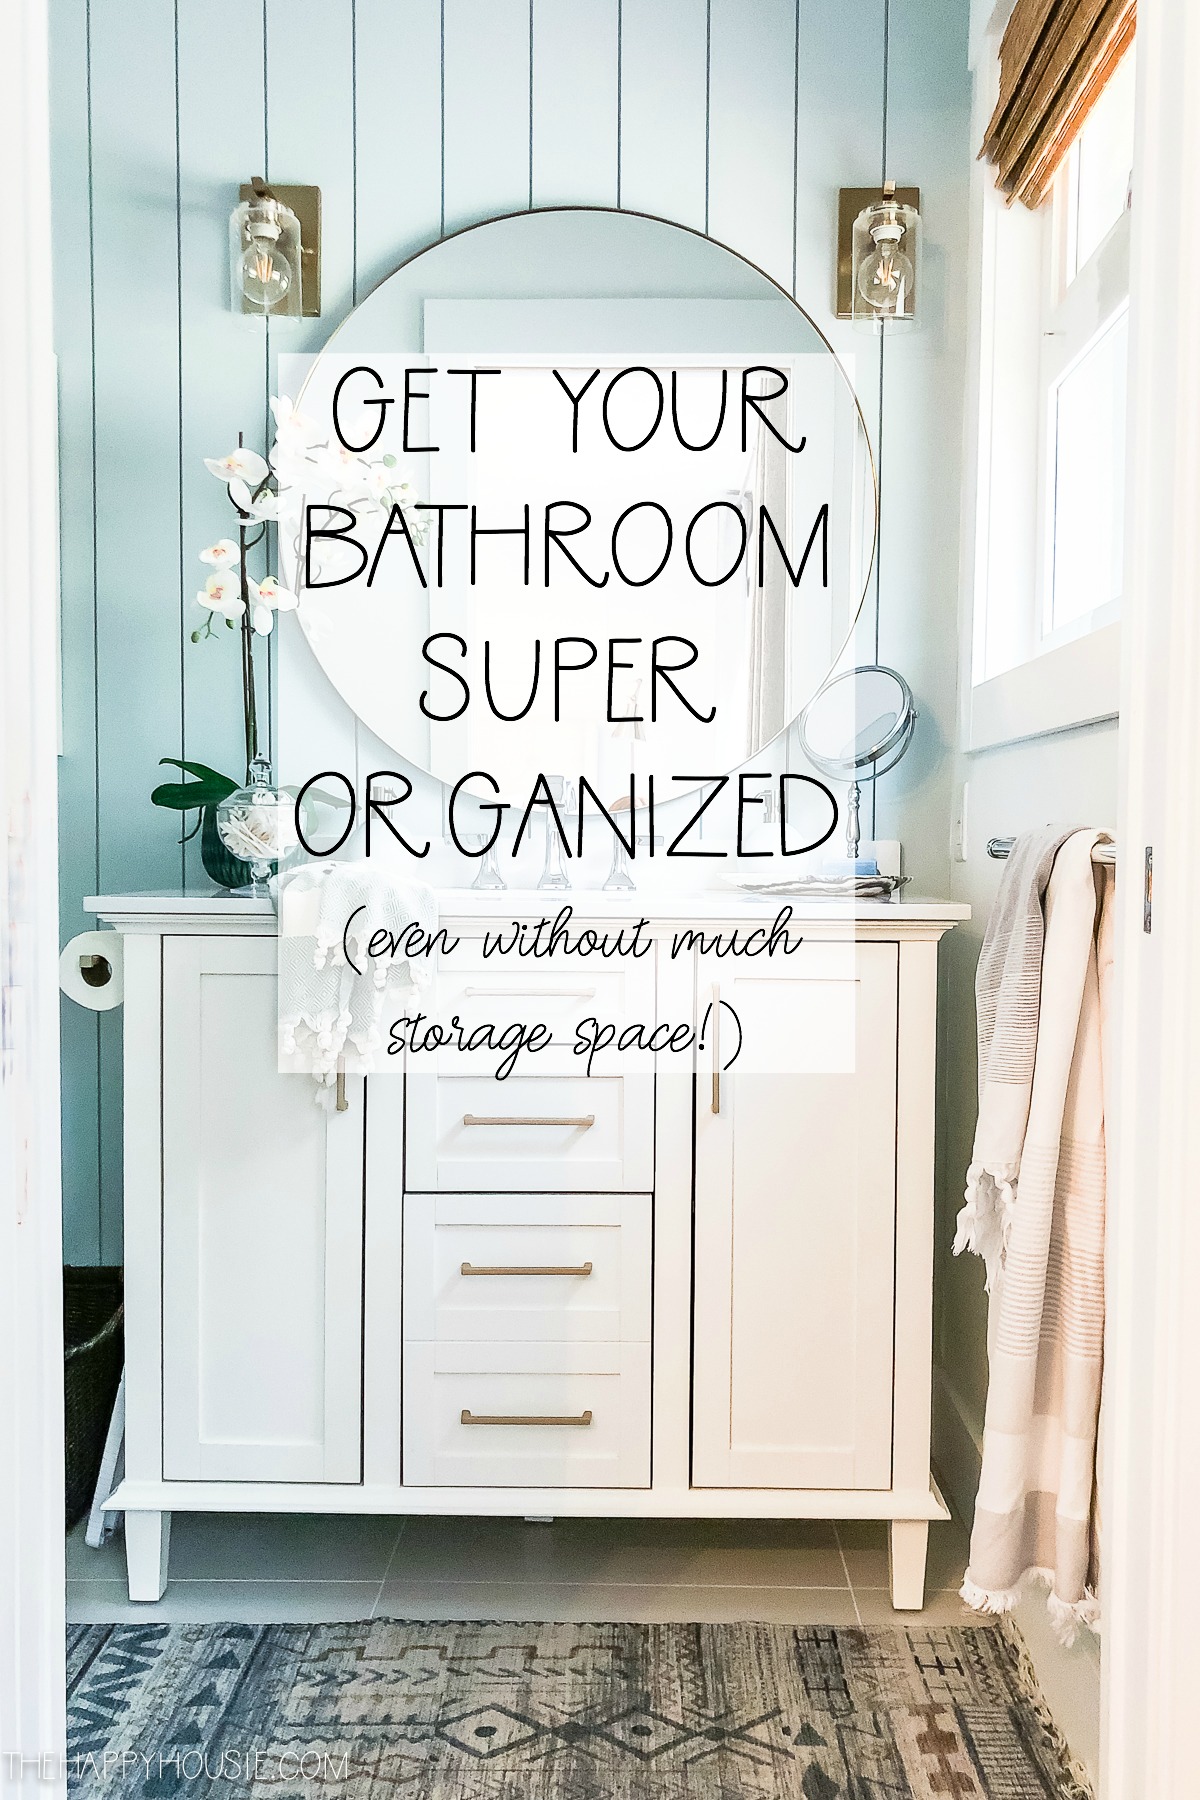 https://www.thehappyhousie.com/wp-content/uploads/2020/02/how-to-get-your-bathroom-super-organized-even-without-much-storage-space-ten-week-organizing-challenge-at-the-happy-housie.jpg